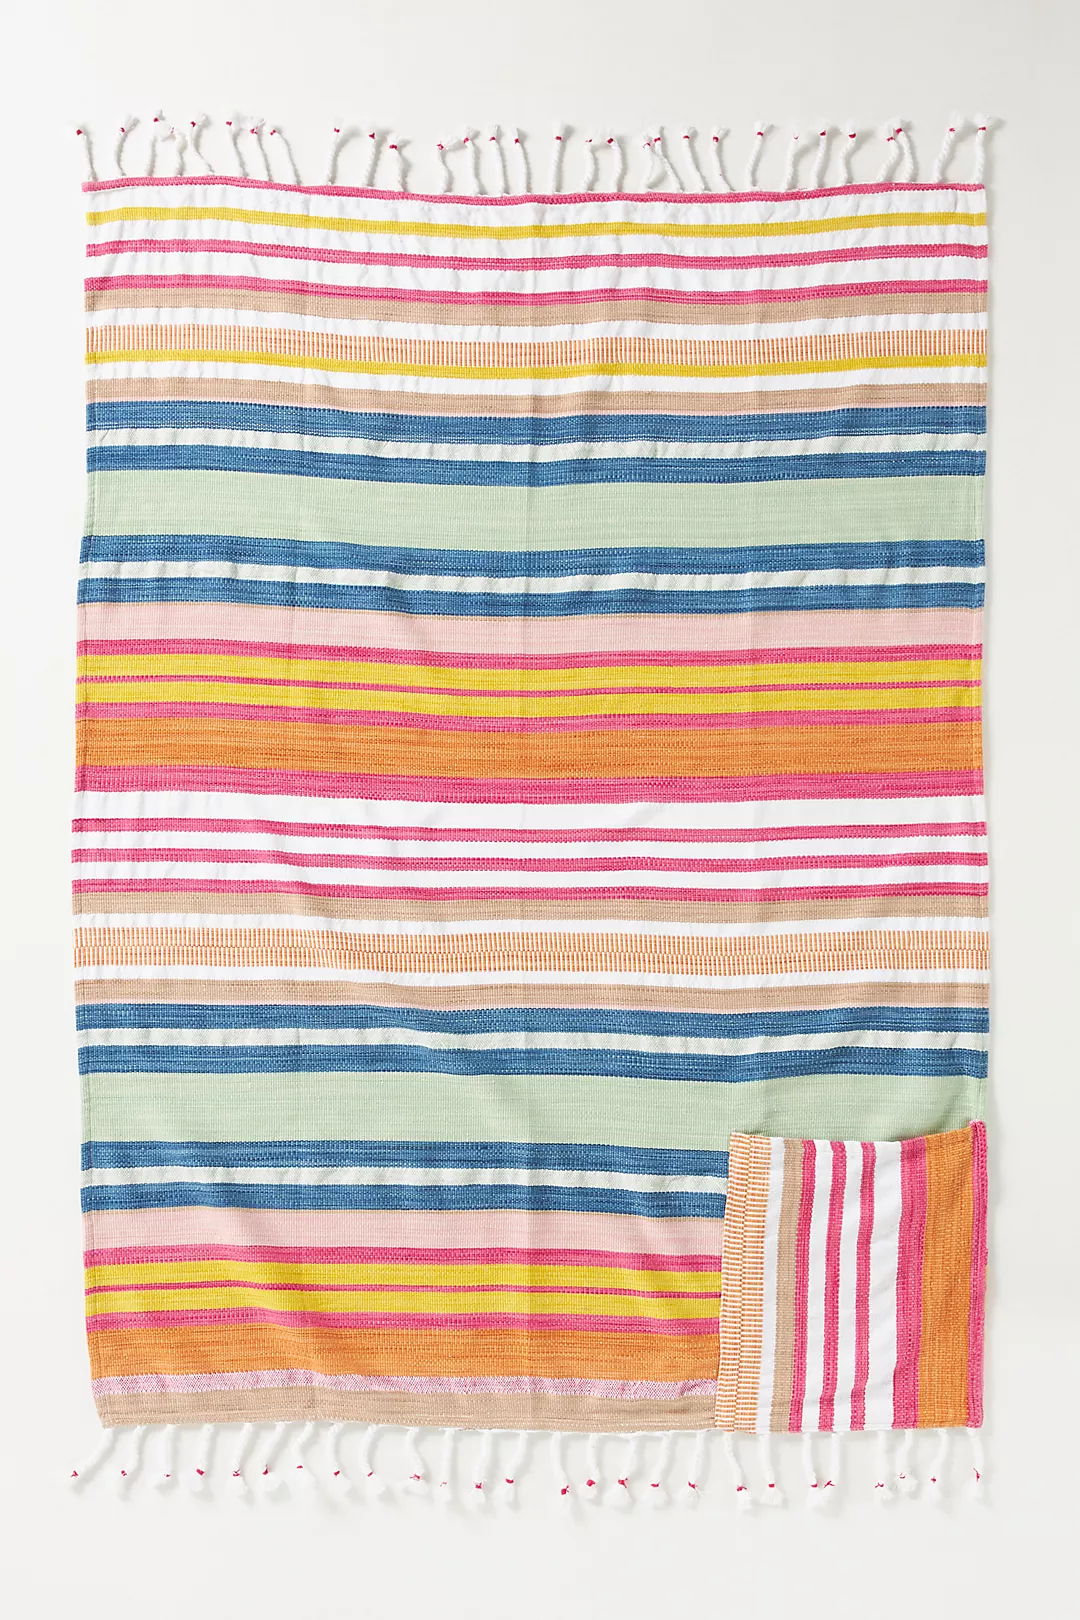 woven fabina picnic blanket from anthropologie